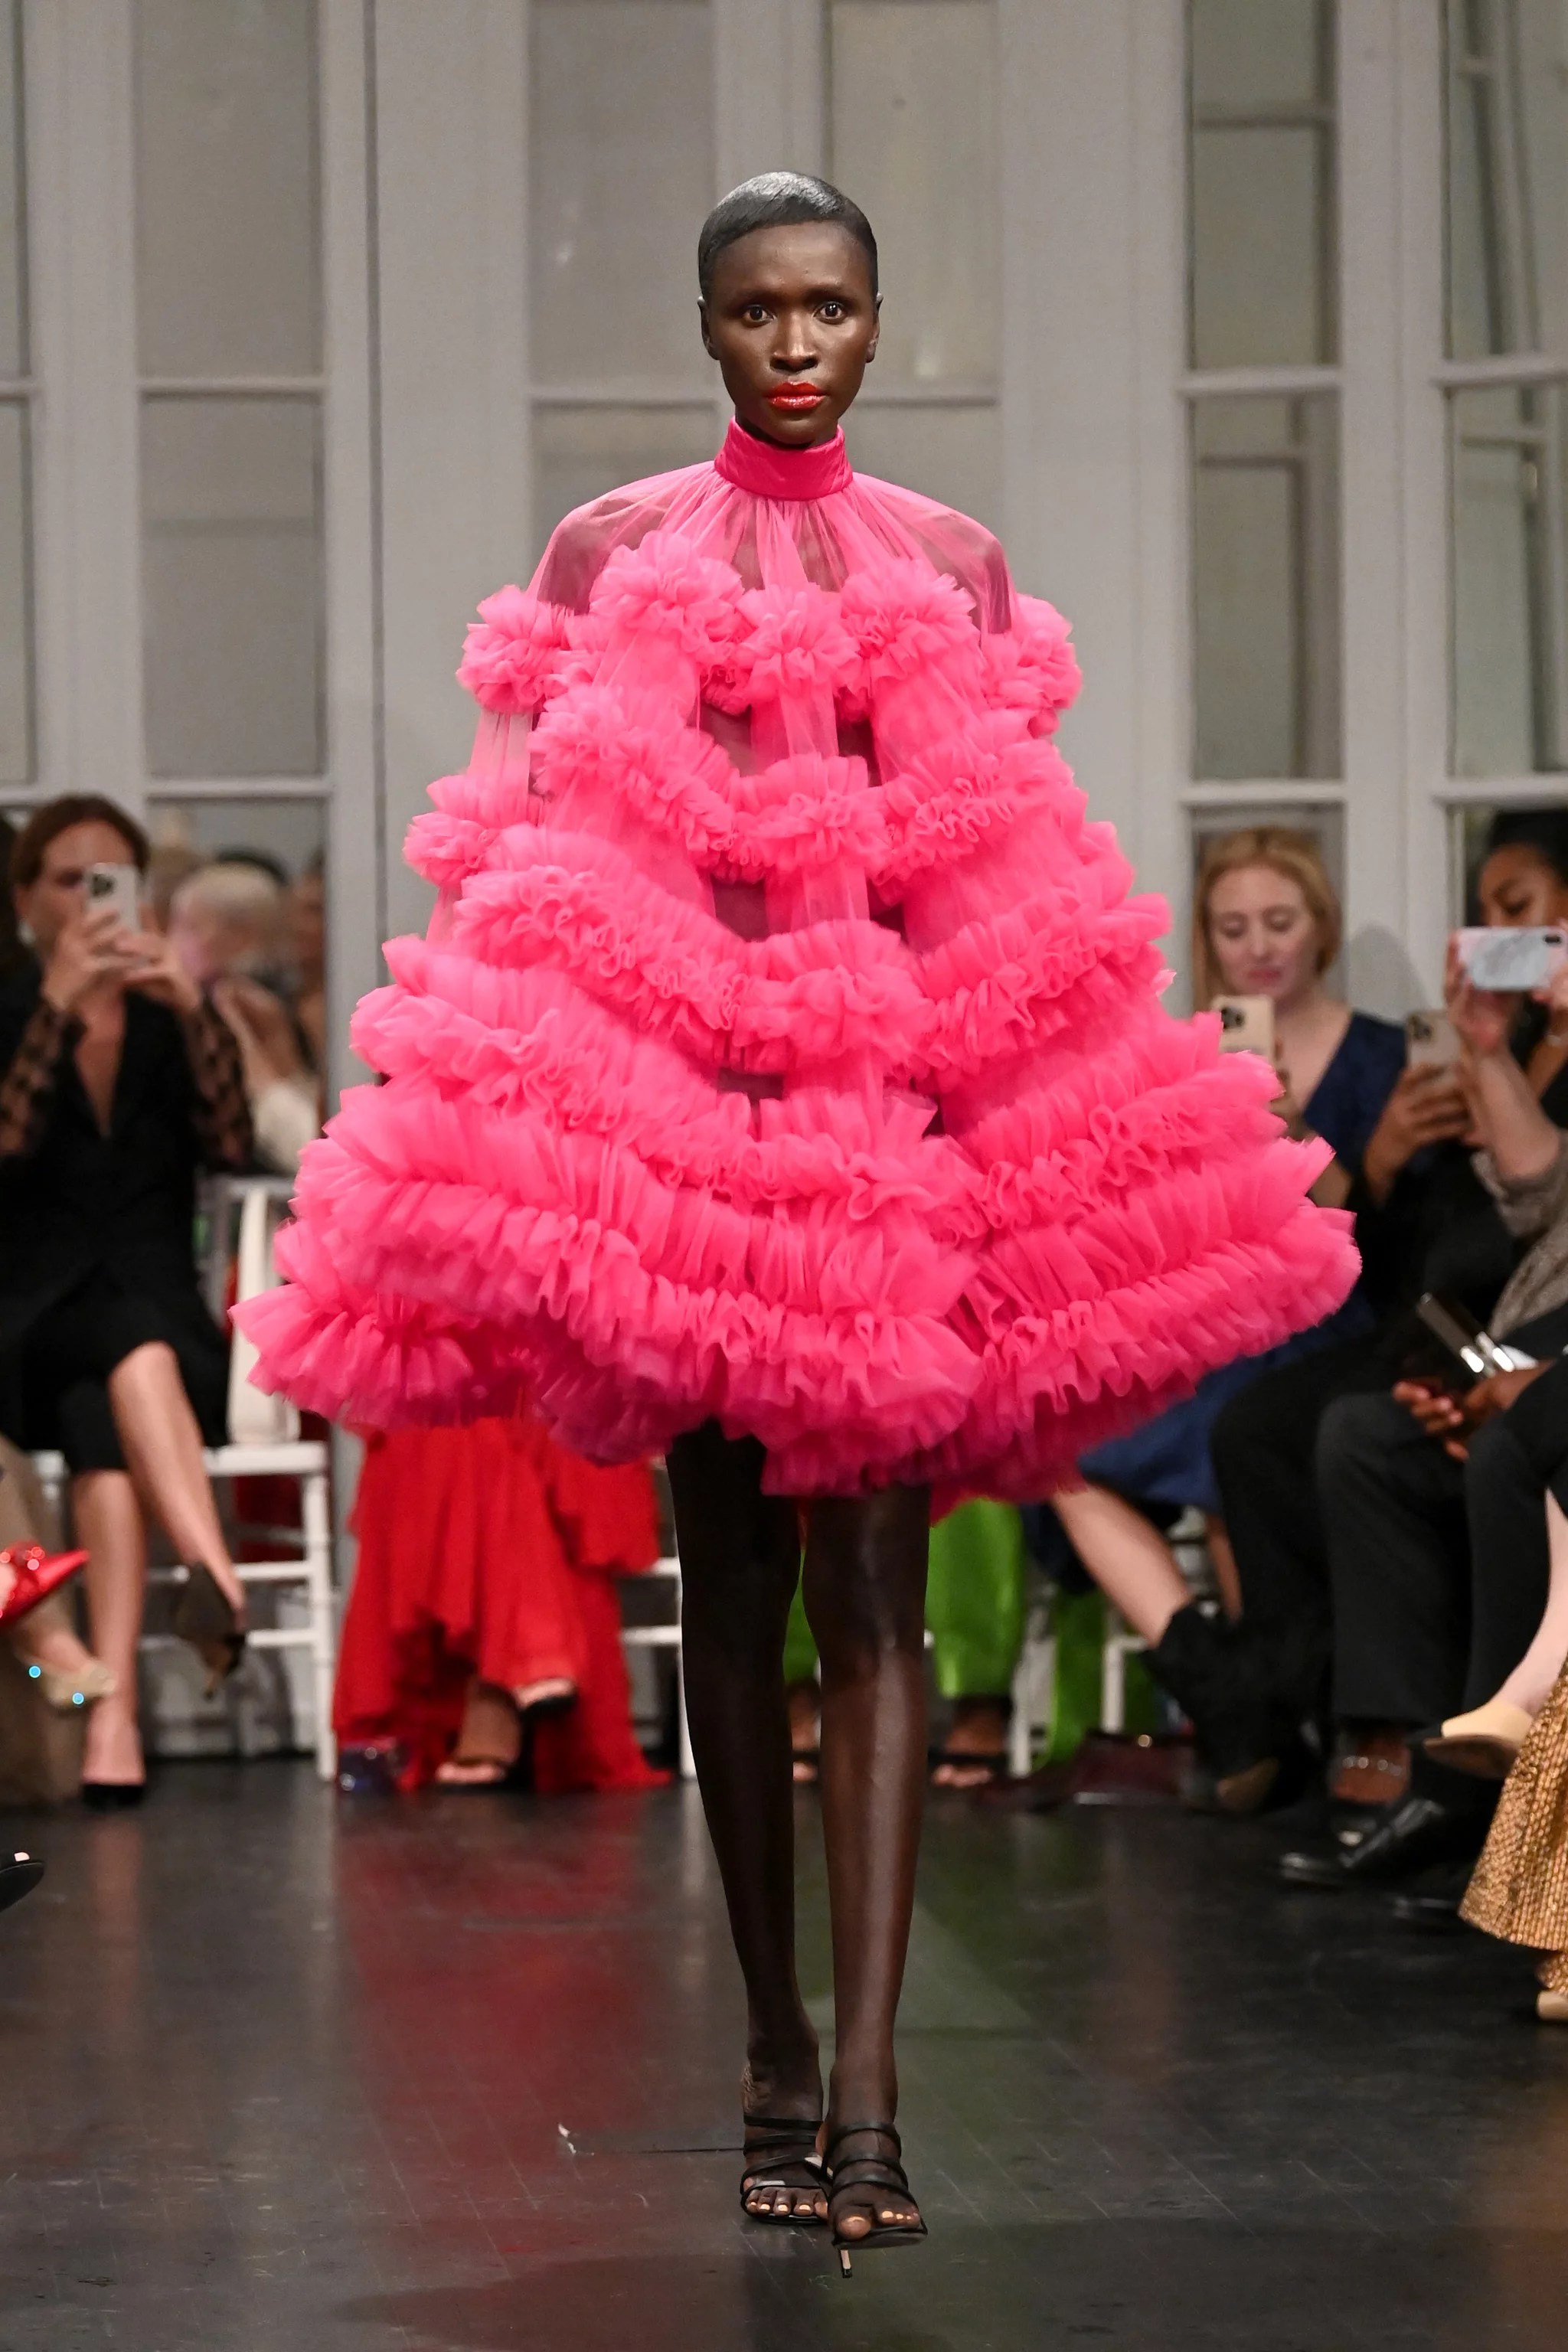 Christian Siriano's Spring 2023 Ready-to-Wear Show